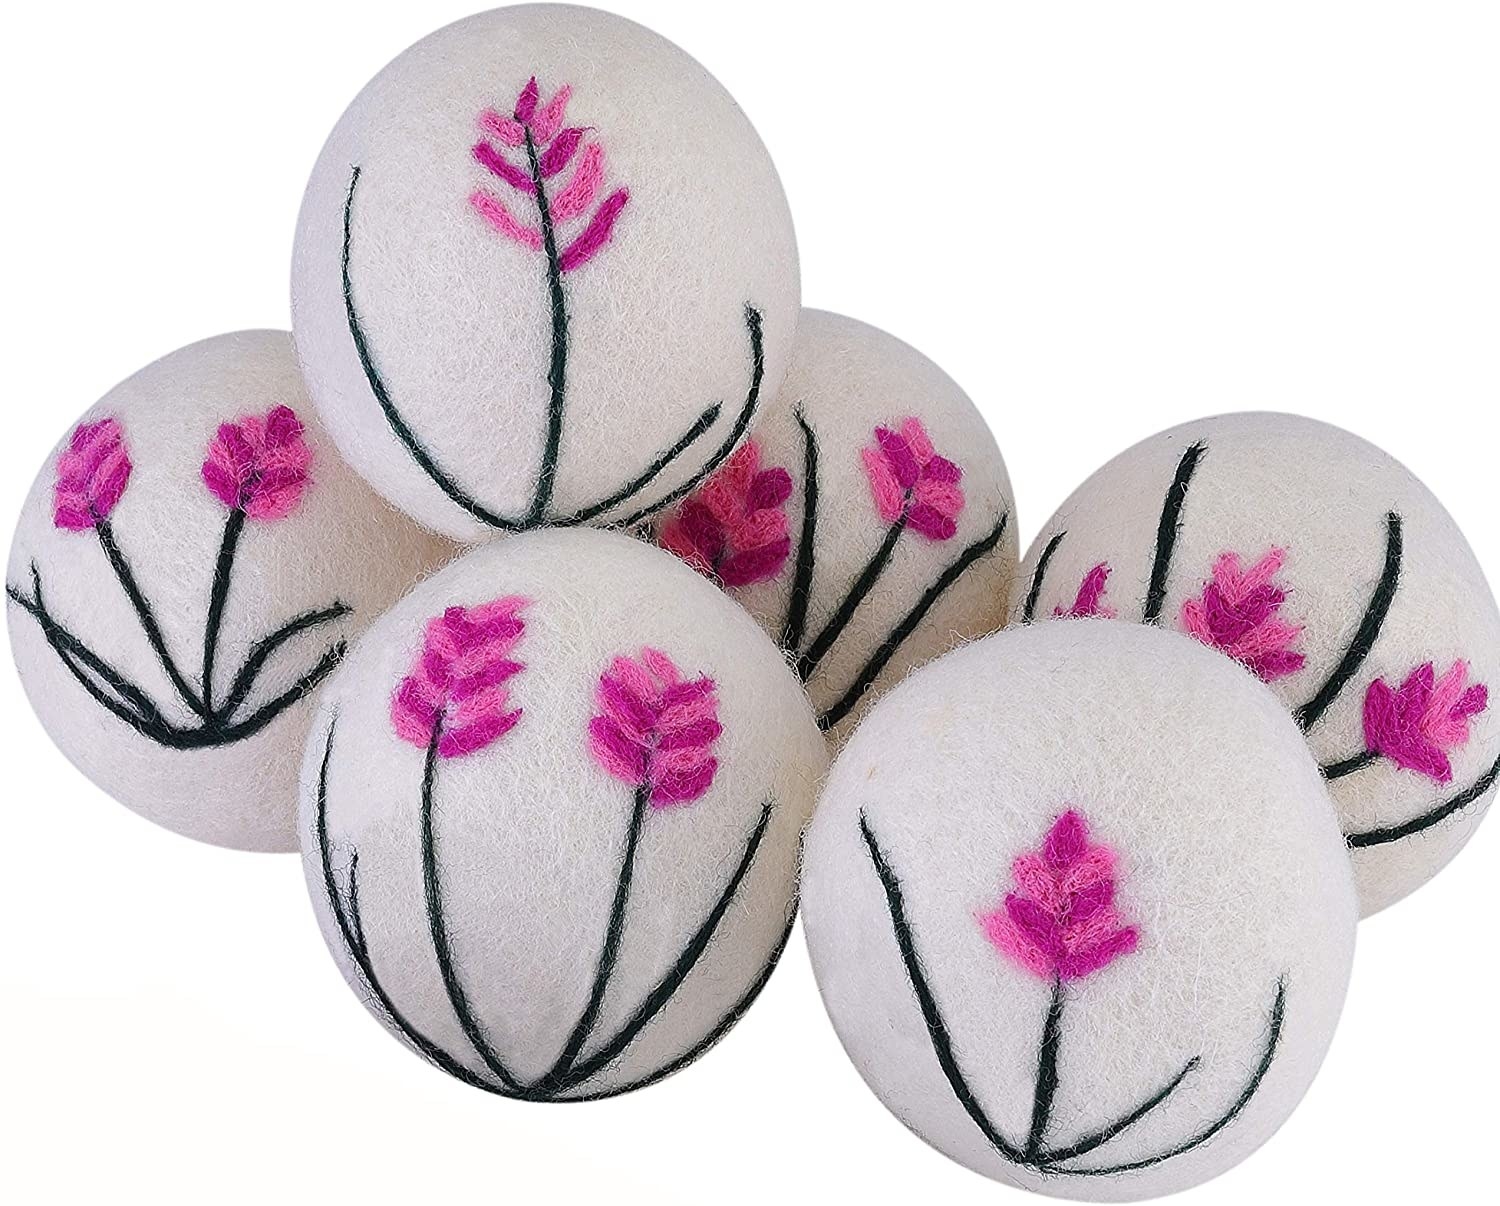 the white wool dryer balls with embroidered flowers on them